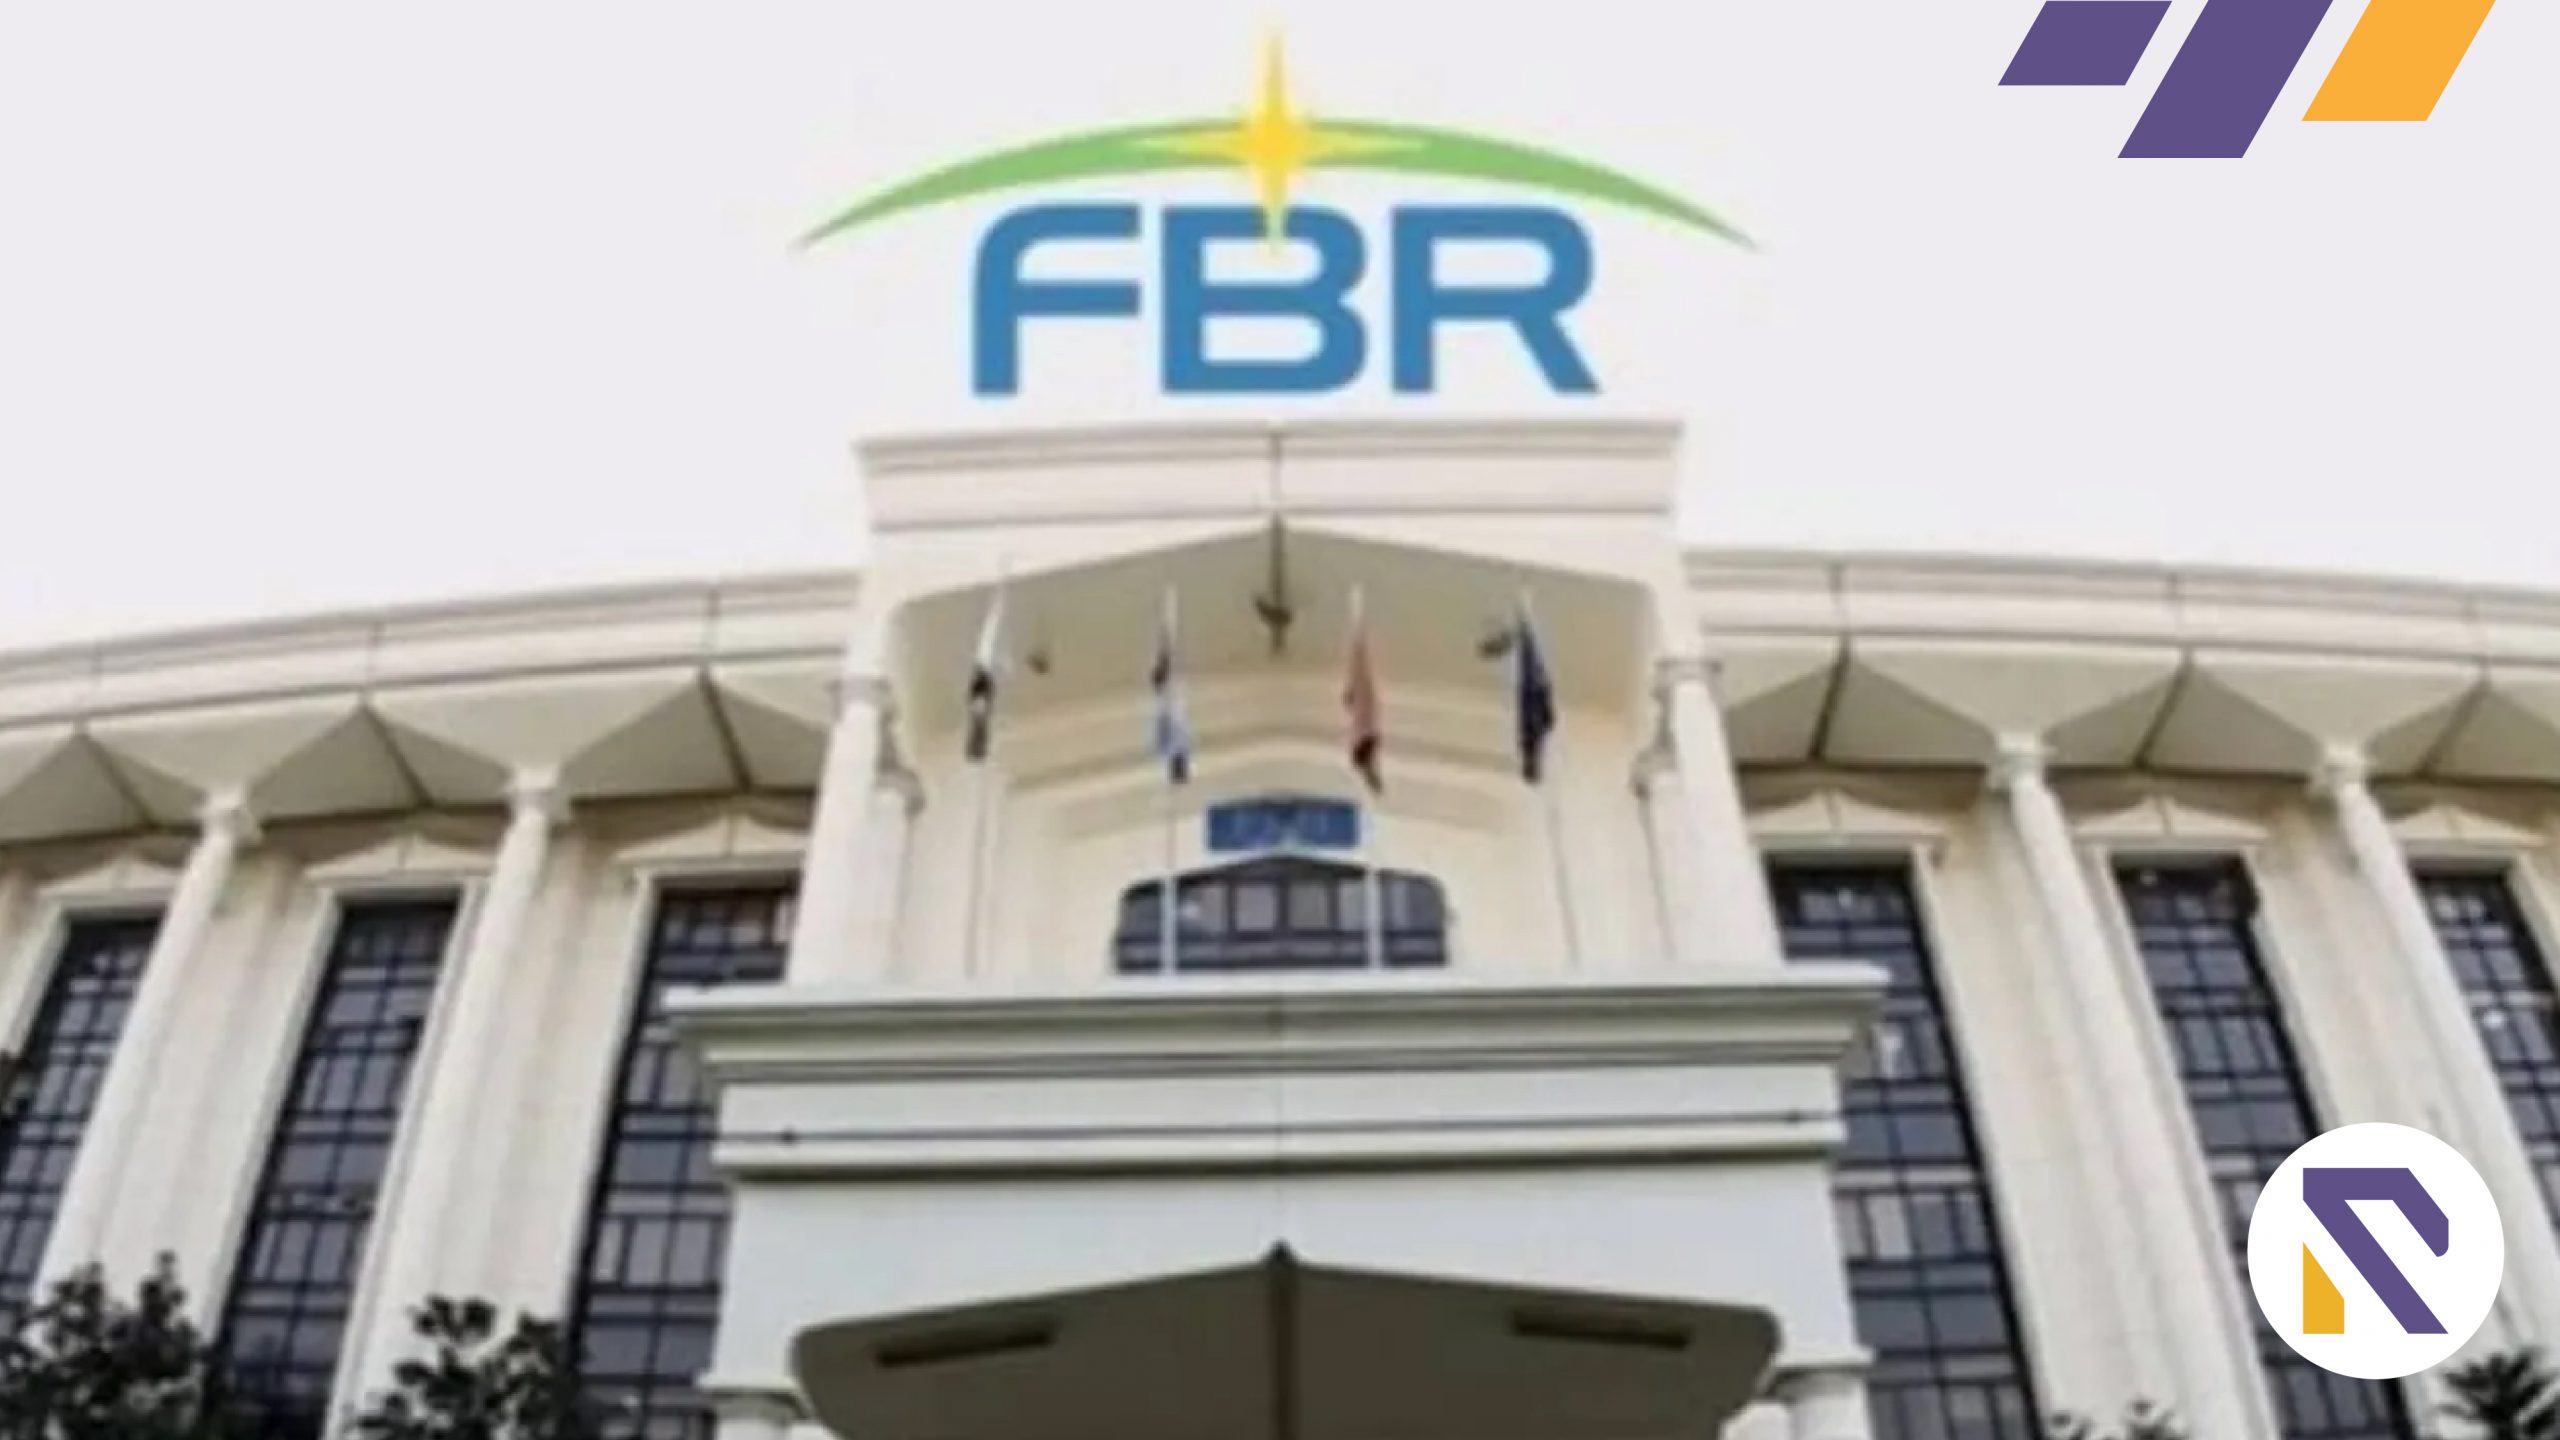 FBR Introduces New Recovery Protocol to Safeguard Taxpayers